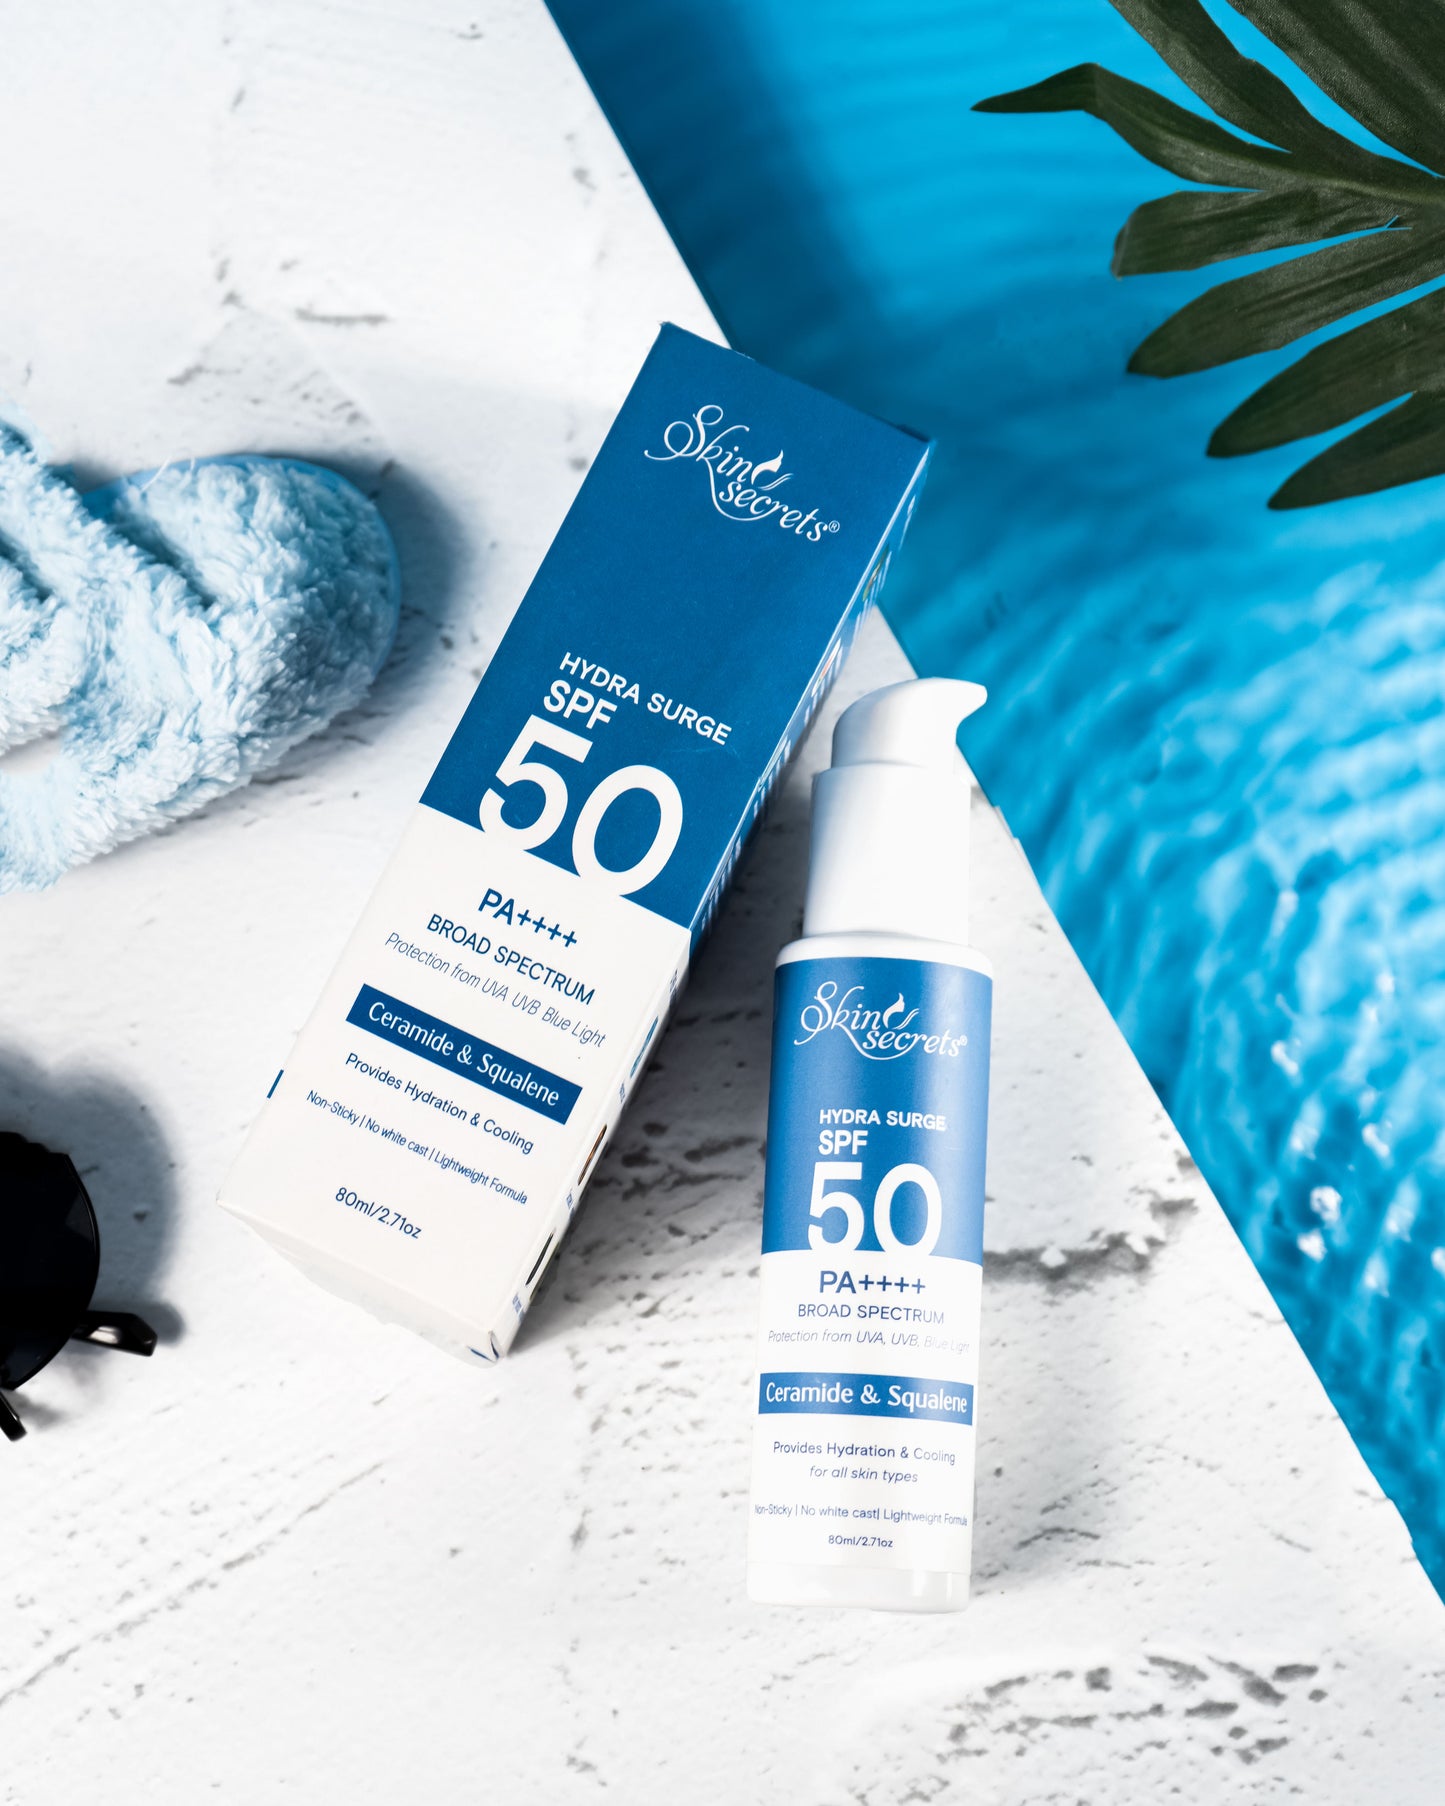 Hydra Surge SPF 50 PA++++ with Ceramides, Squalene & Watermelon Extract